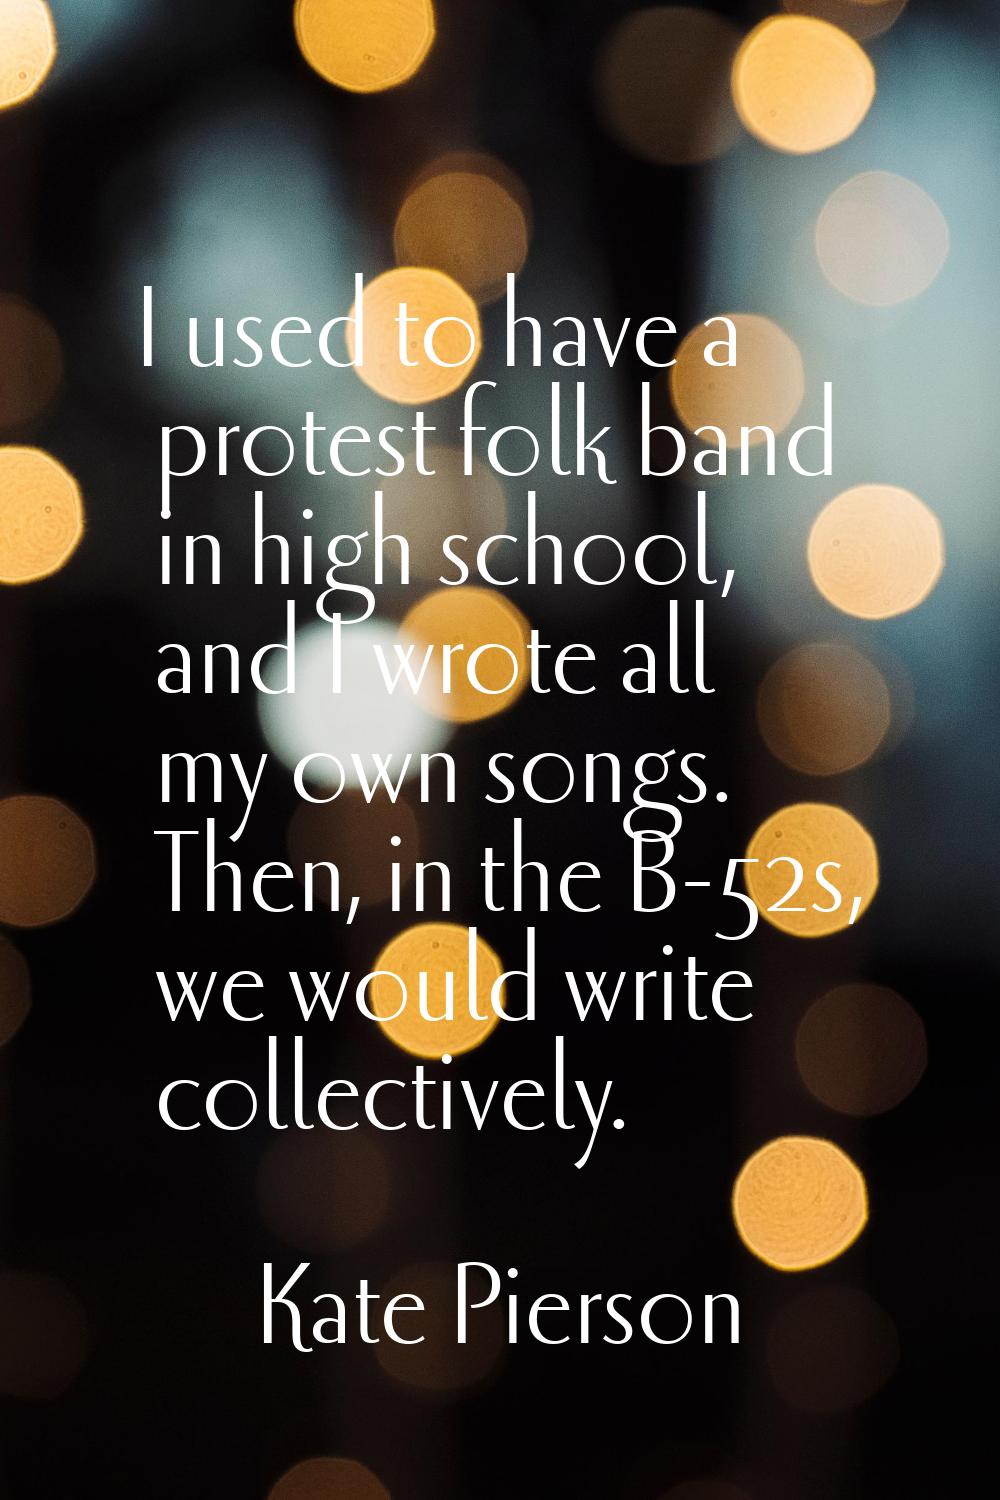 I used to have a protest folk band in high school, and I wrote all my own songs. Then, in the B-52s